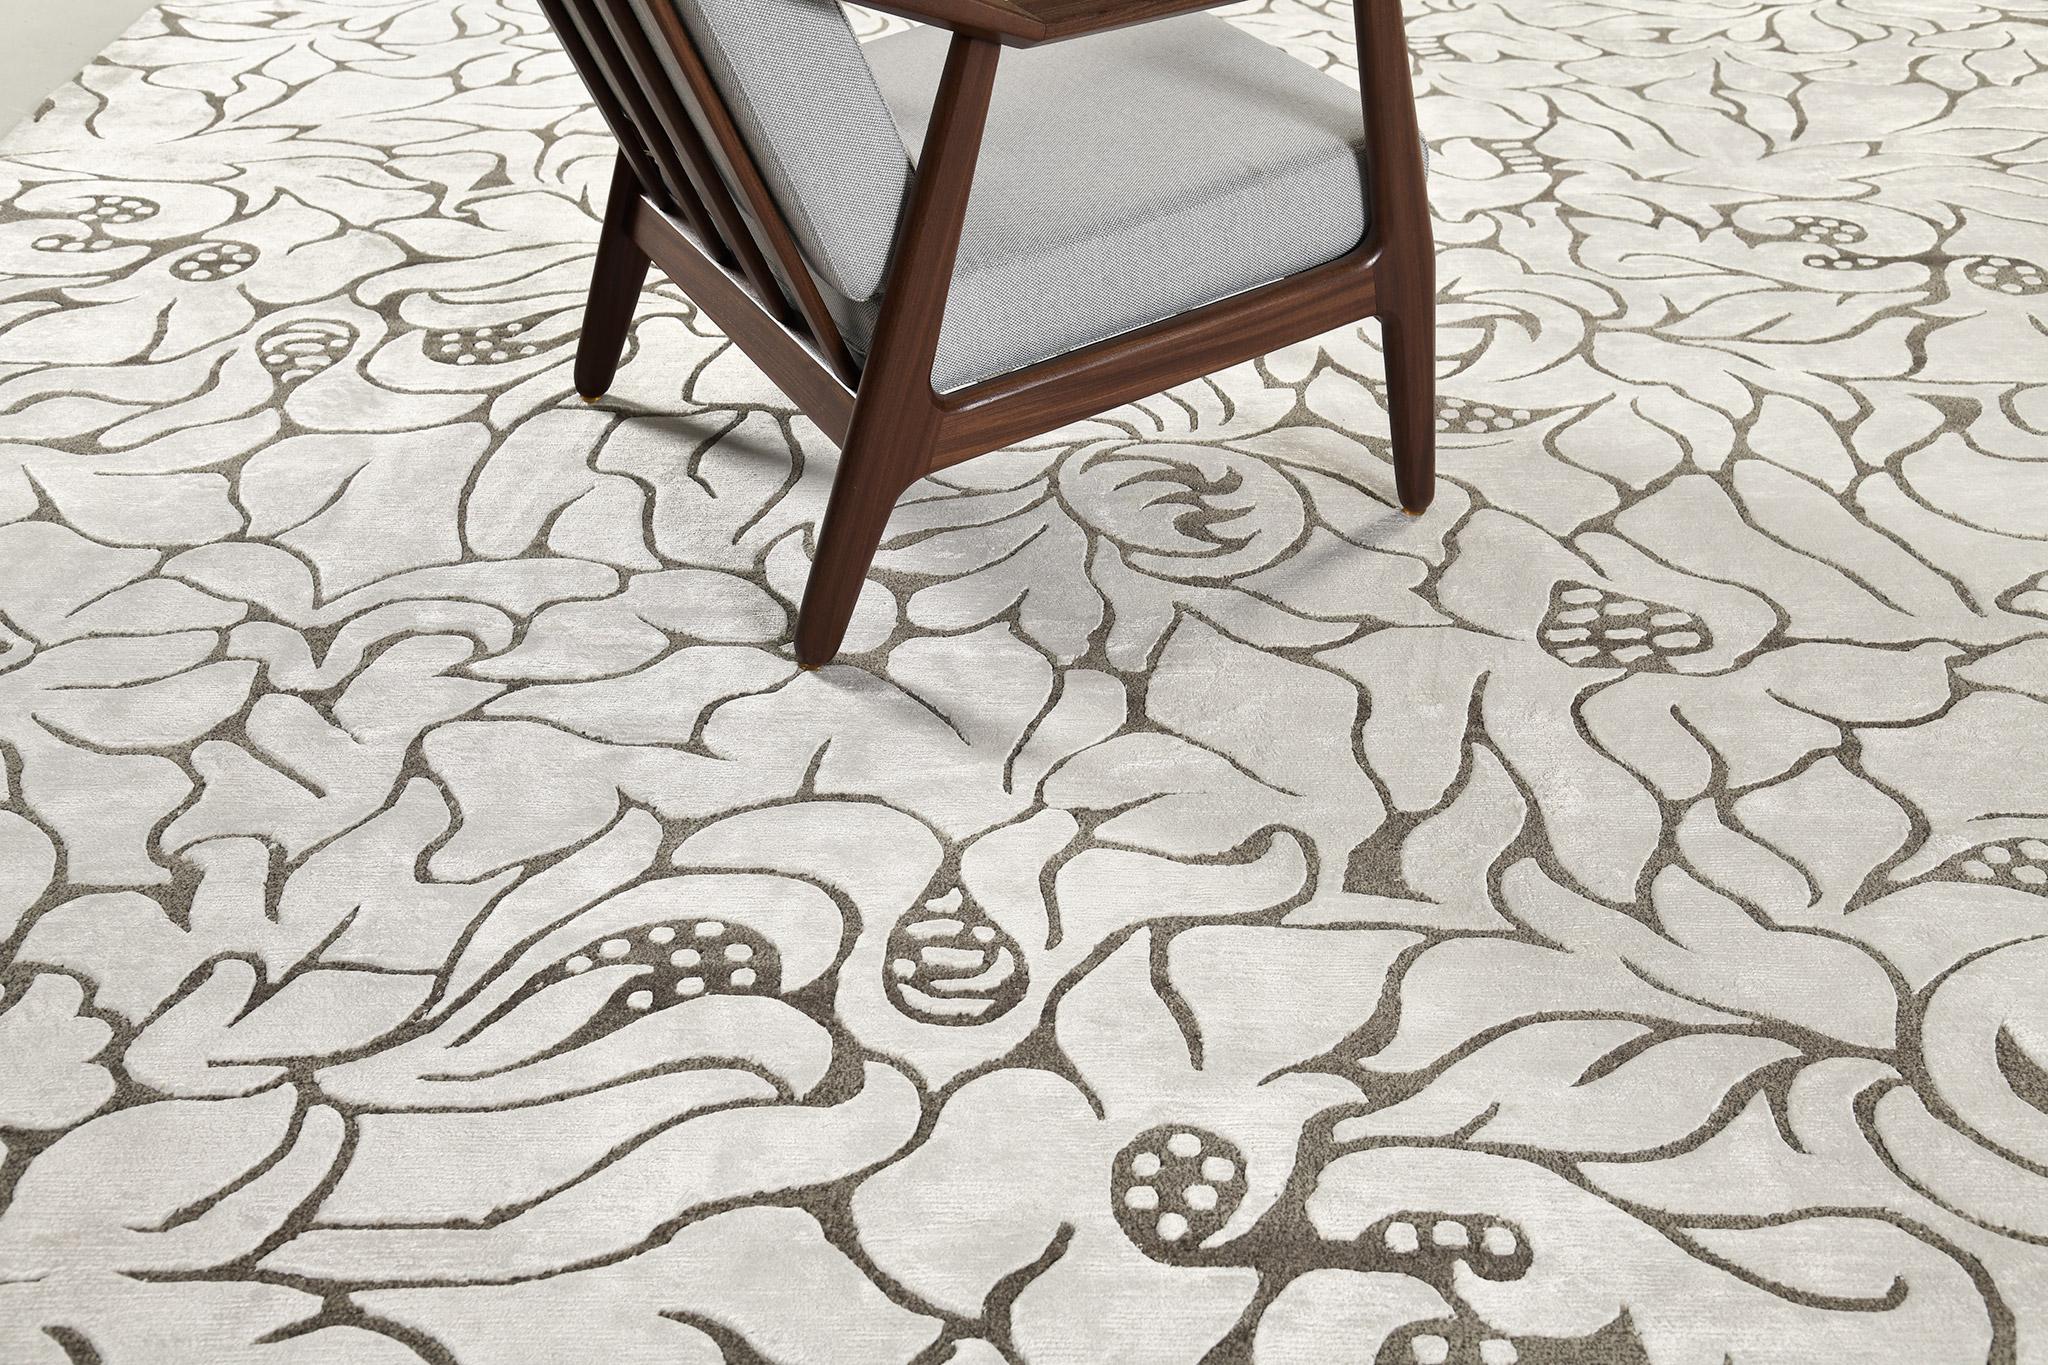 Jardin is a wool and silk that brings out the best of any room space. It's the grayscale doodled theme and outlined floral works that make an outstanding piece of art. Adding these to your collection will be a great investment in a modern